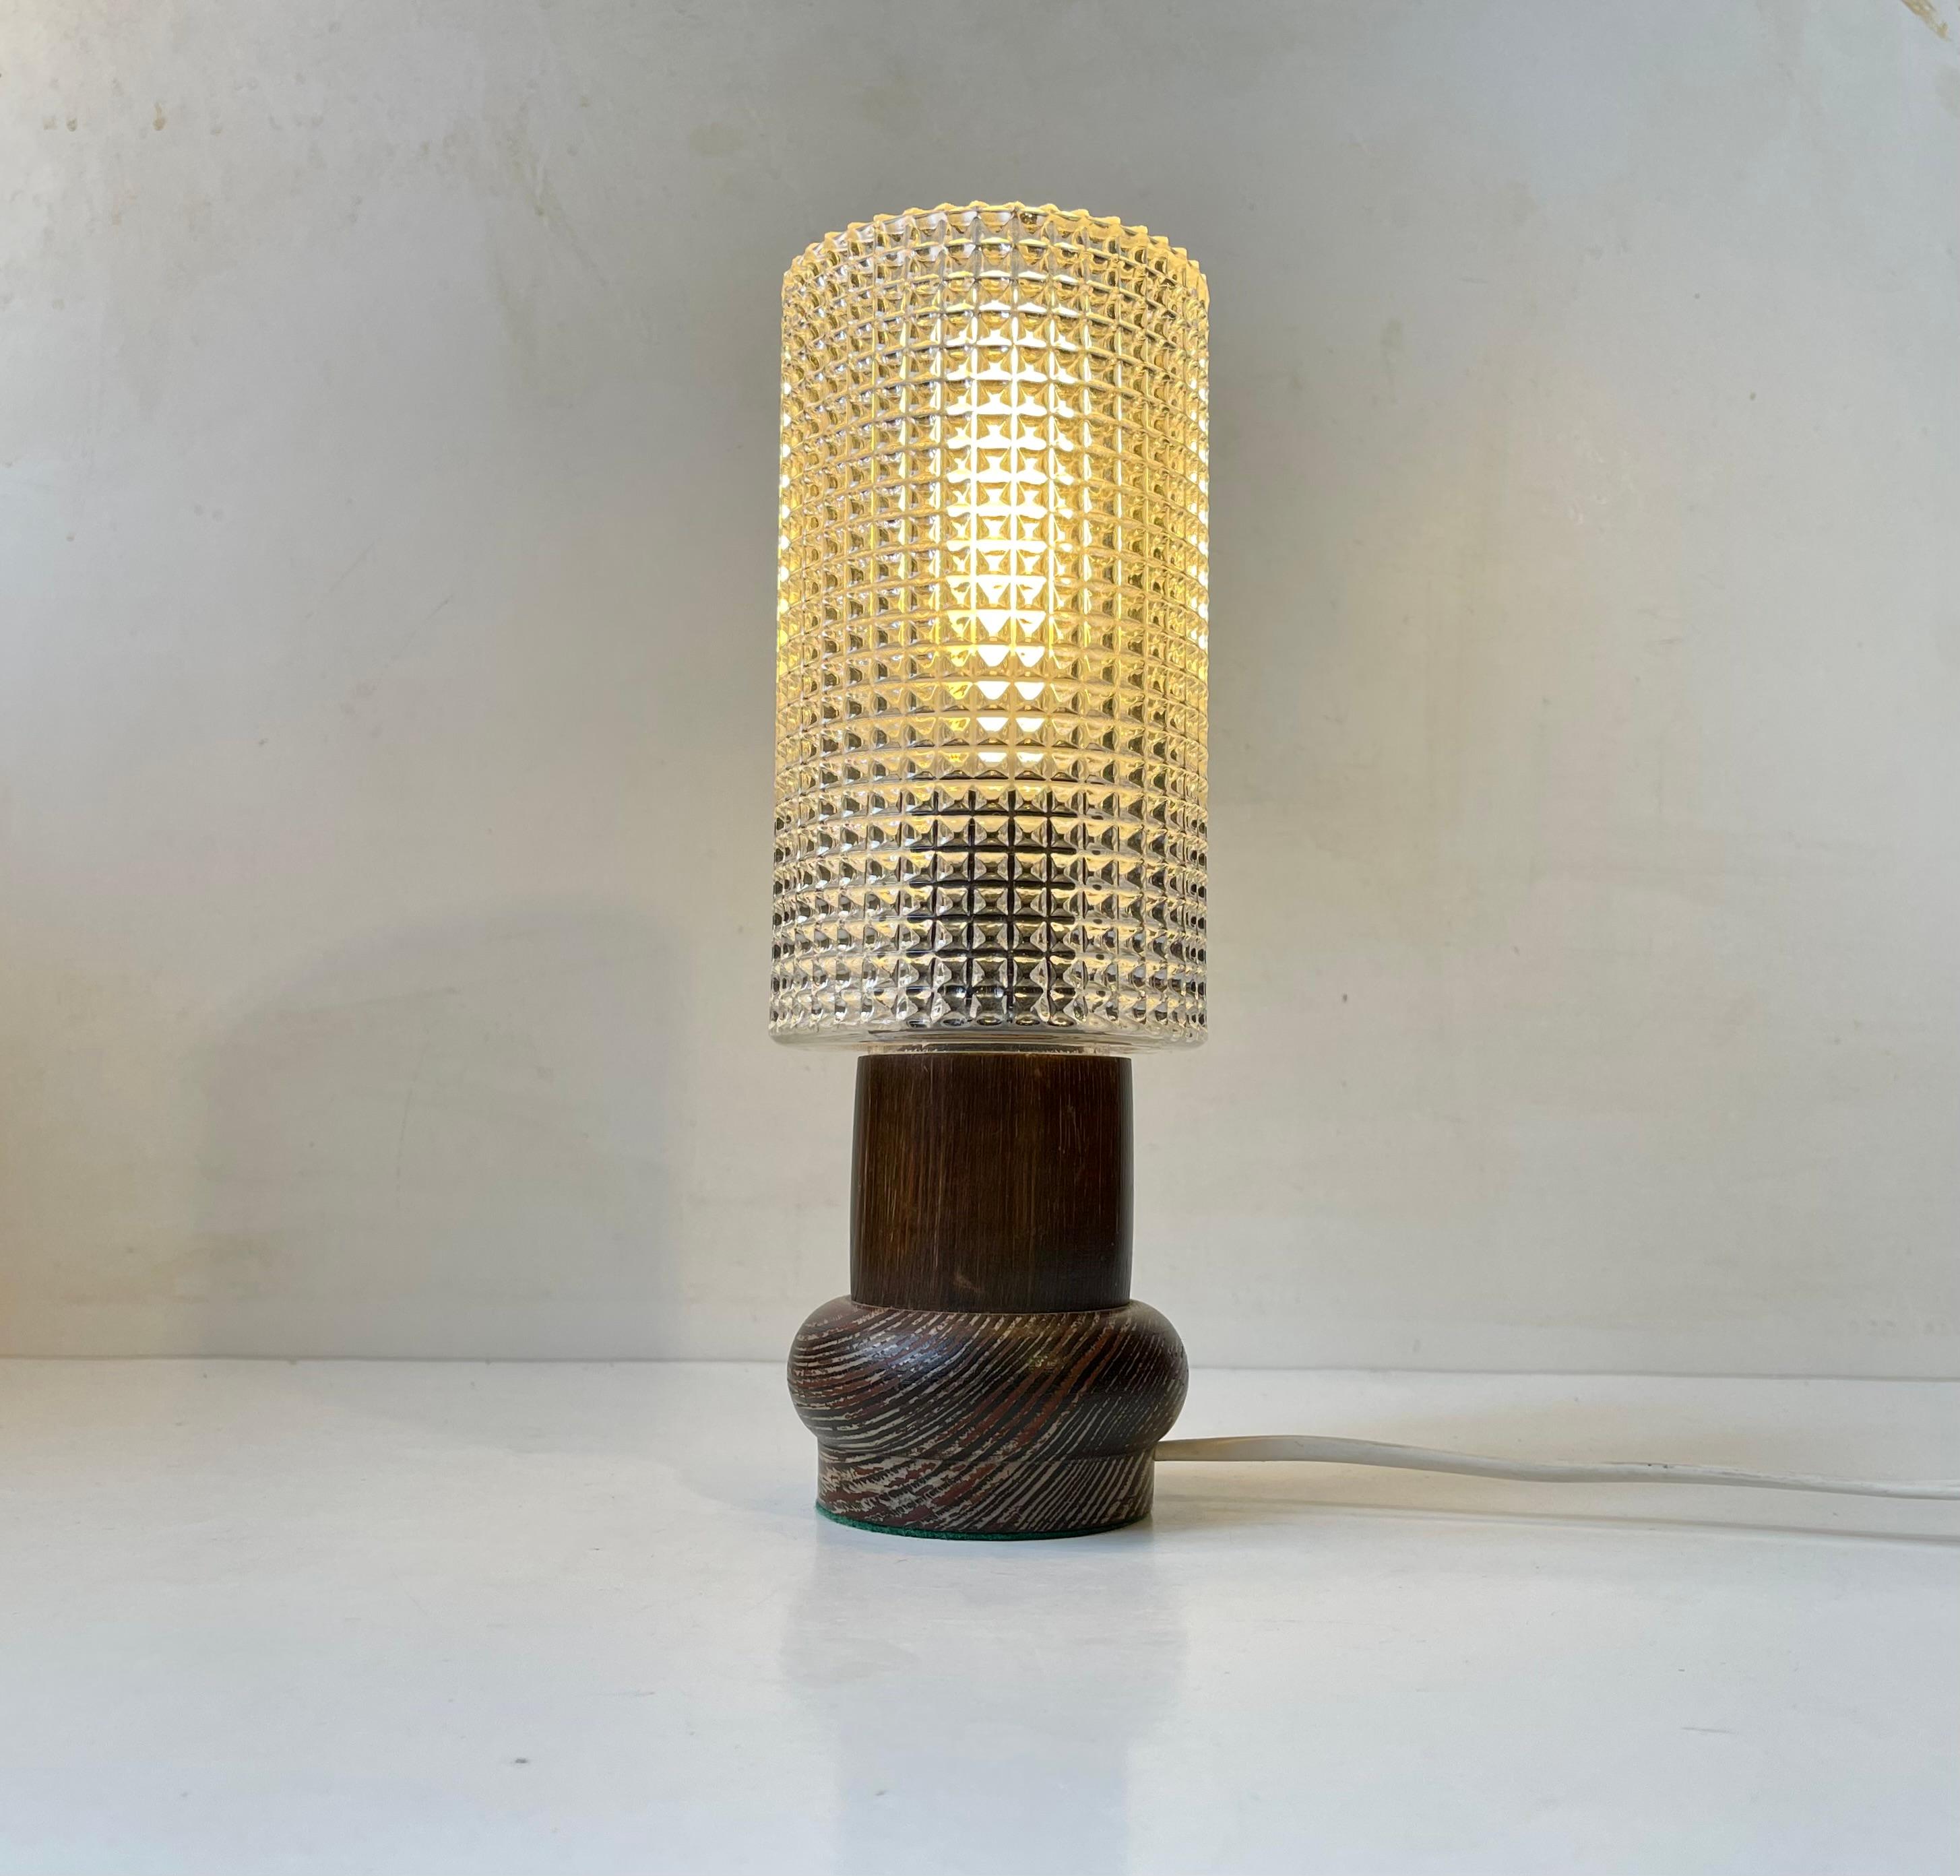 Small unusual table light fashioned from lacquered/dark zebra wood and installed with a cylindrical shade in diamond pattern glass. Unknown Scandinavian maker circa 1970-80. Measurements: H: 27 cm, Diameter: 10 cm (shade).  For the US. It will come